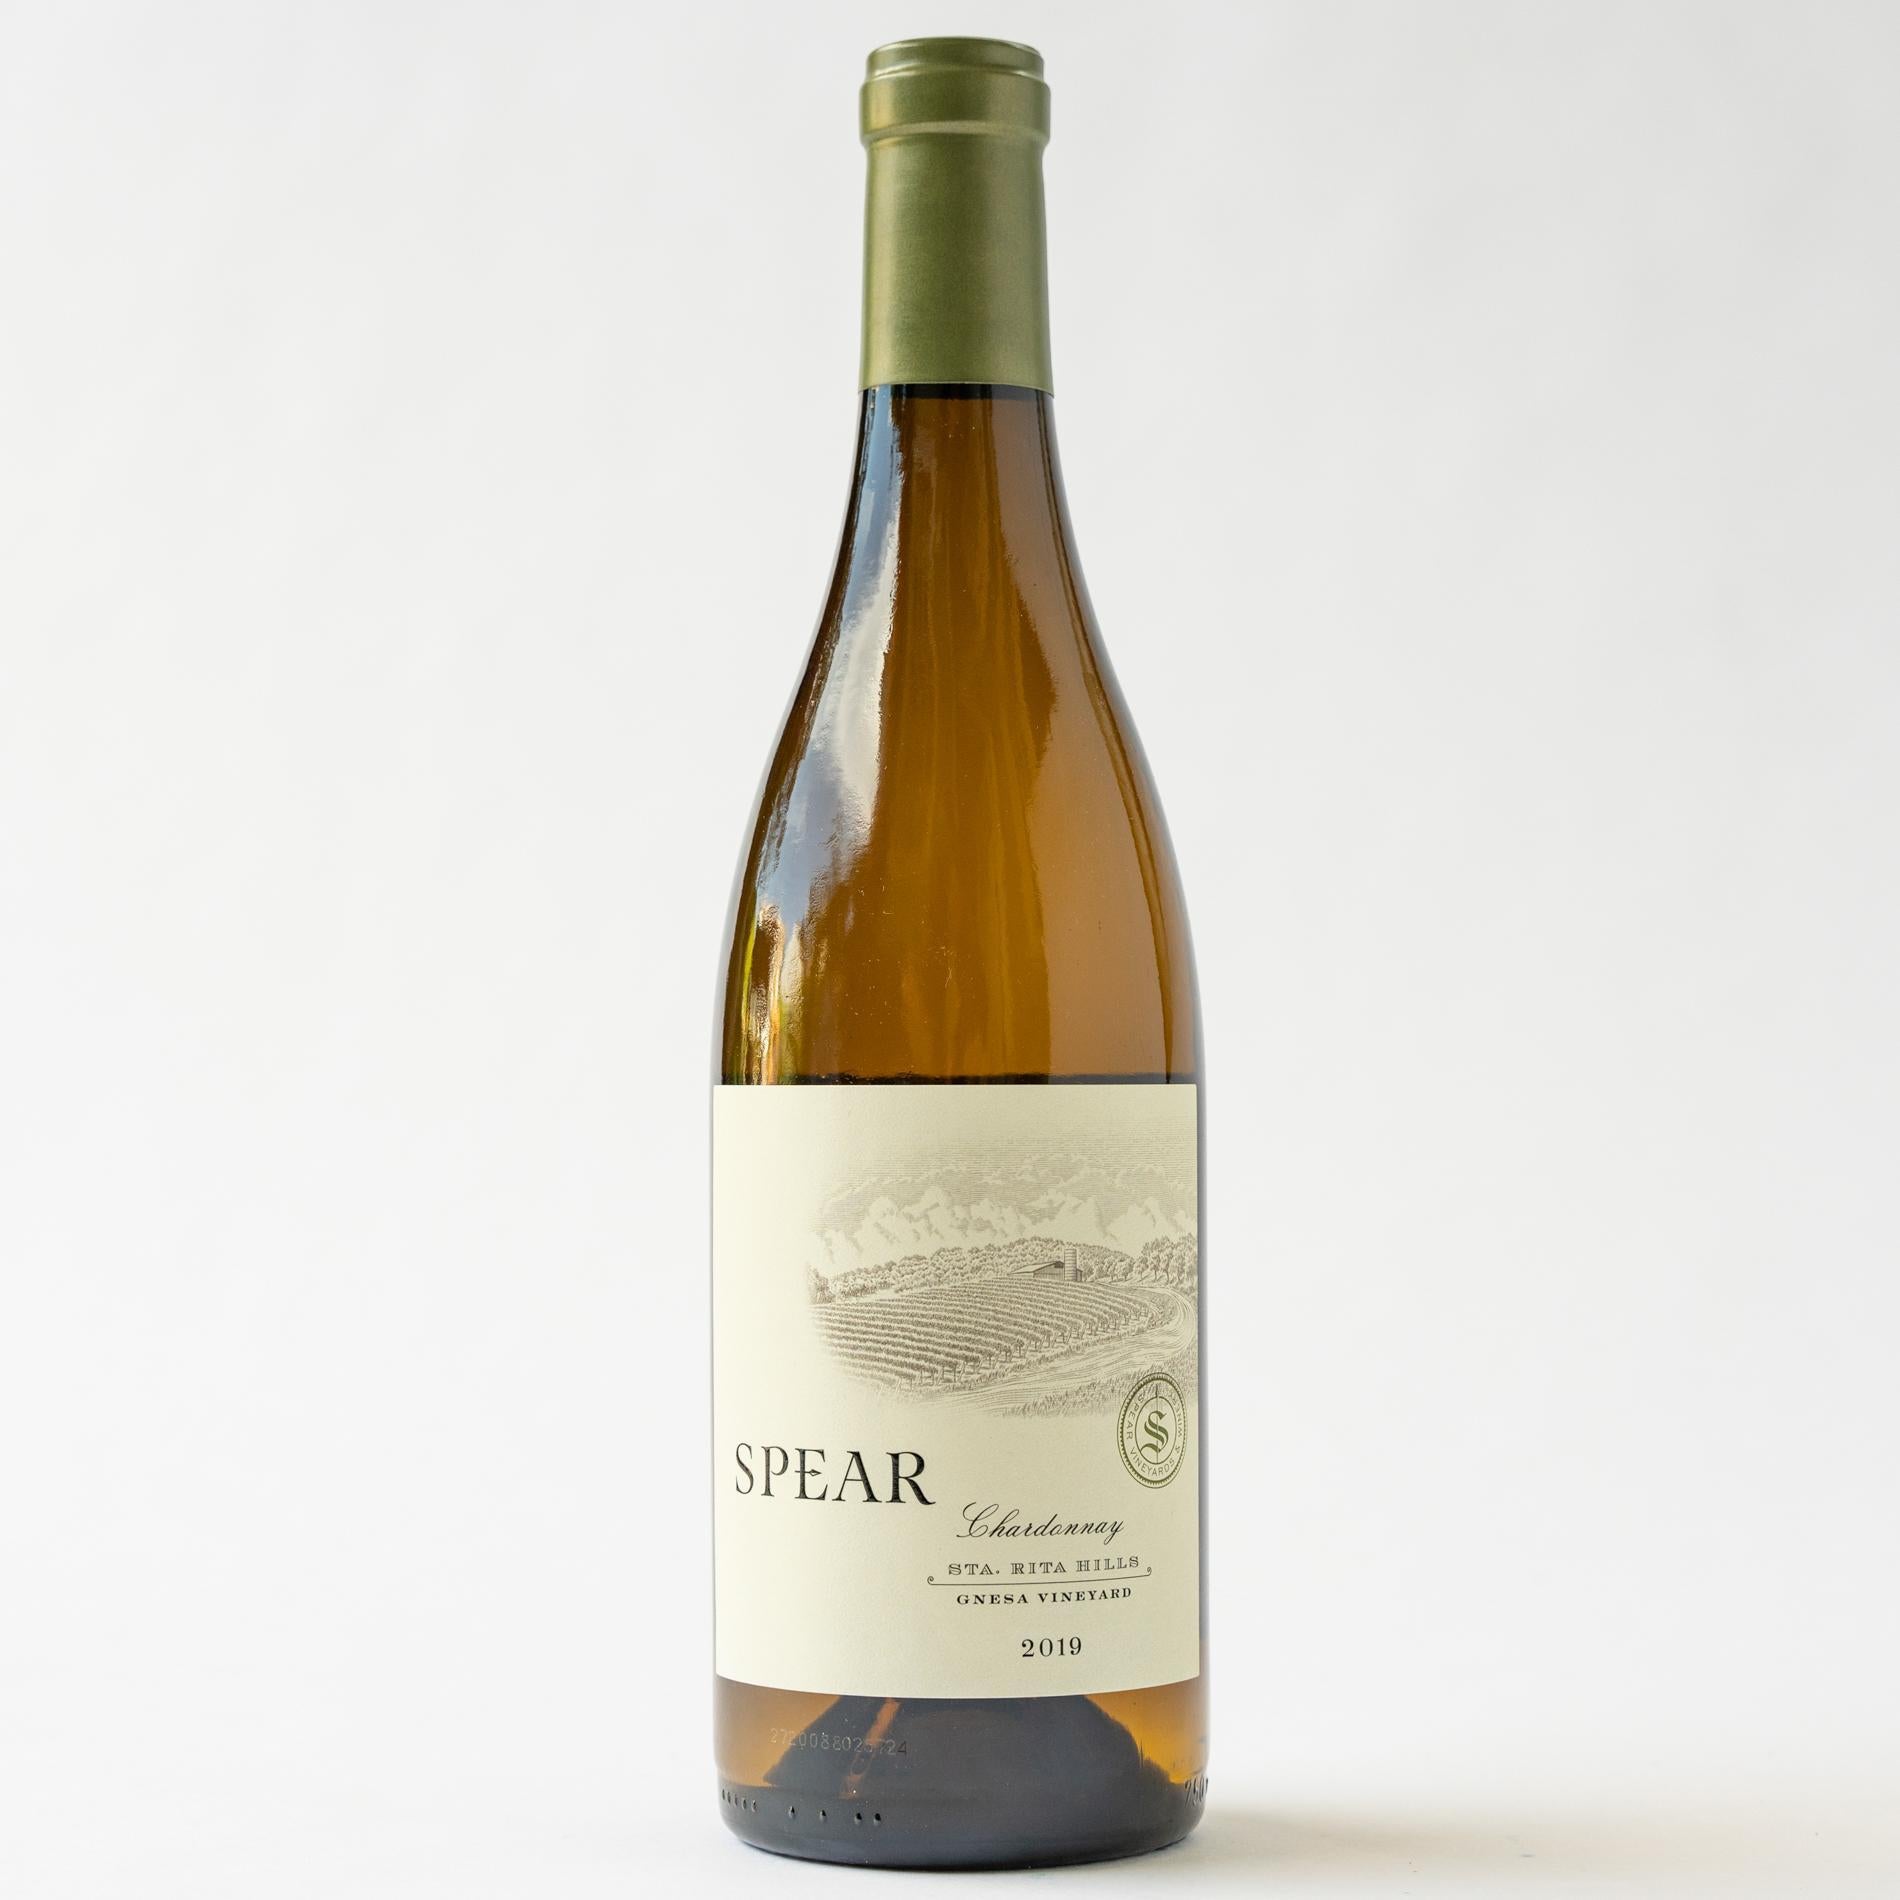 A bottle of Spear's Chardonay on a white background